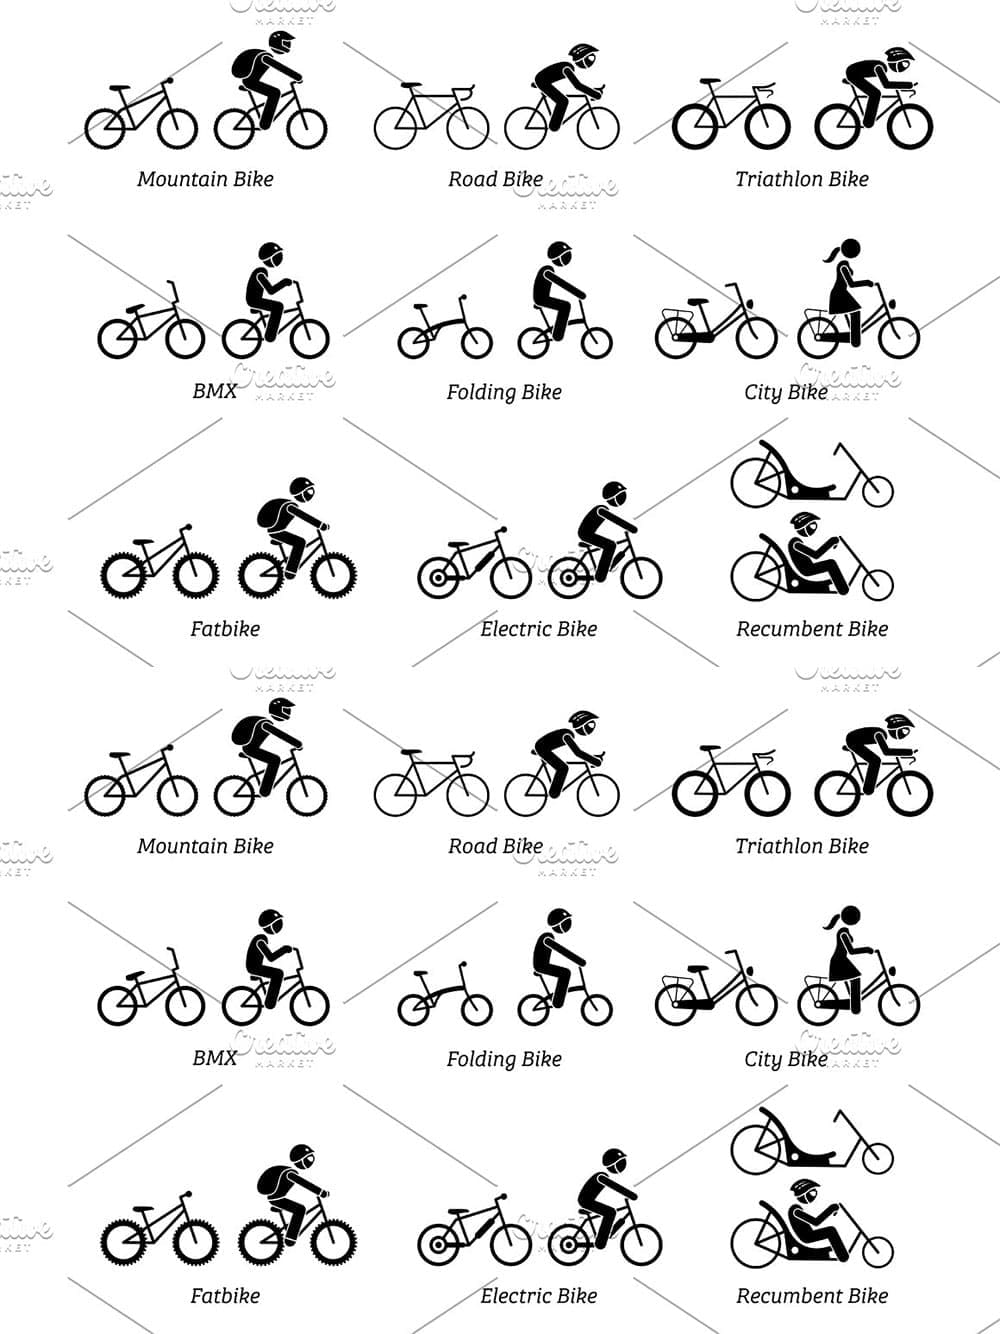 Types of bicycles riders pictogram, picture for pinterest.